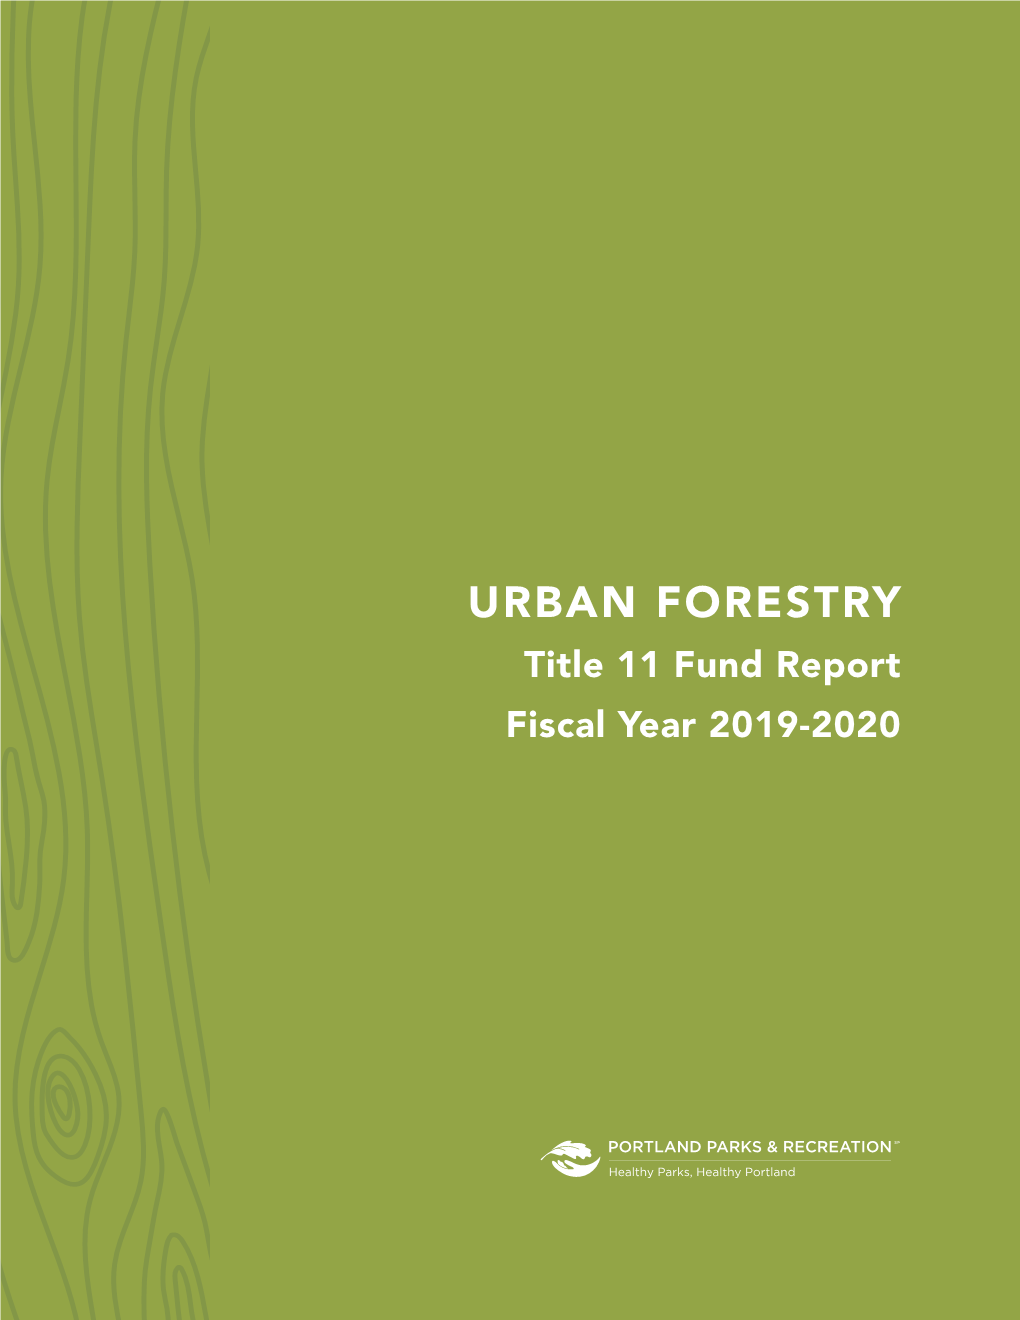 URBAN FORESTRY Title 11 Fund Report Fiscal Year 2019-2020 Volunteers Measure Trees and Collect Data During Park Tree Inventory